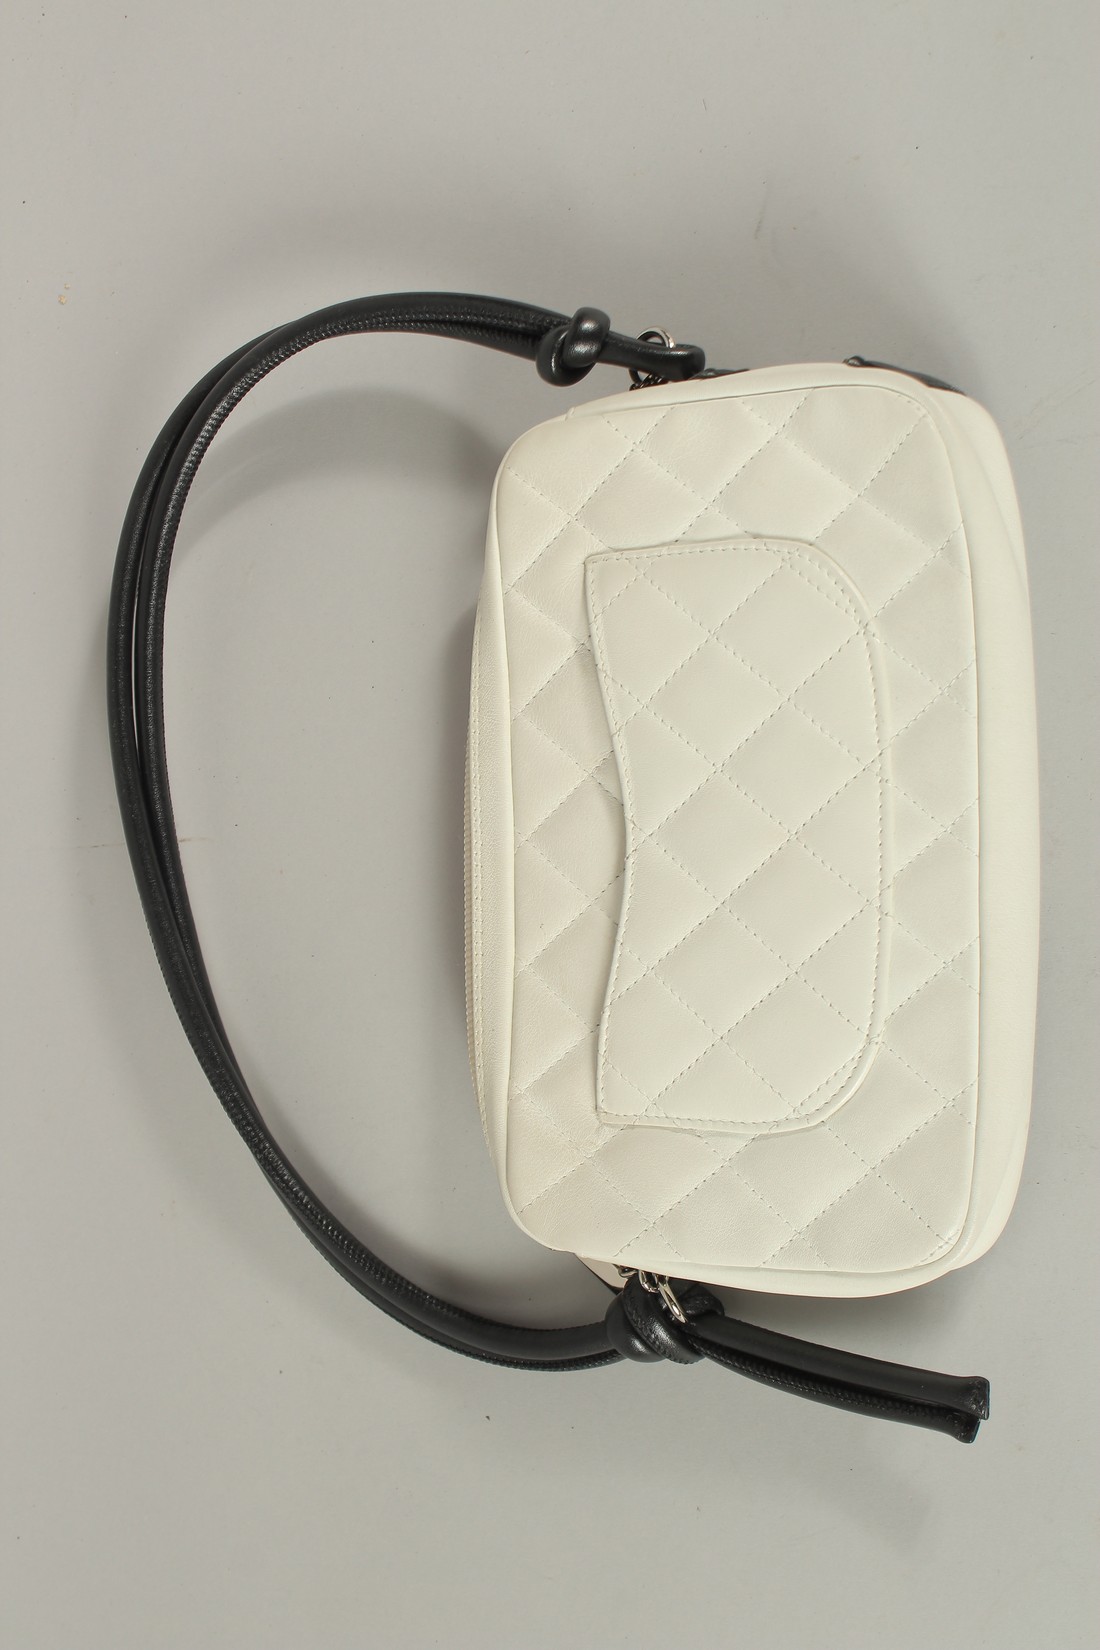 A CHANEL WHITE LEATHER BAG with black CC and handle, with dust cover. 22cms long x 15cms deep. - Image 2 of 6